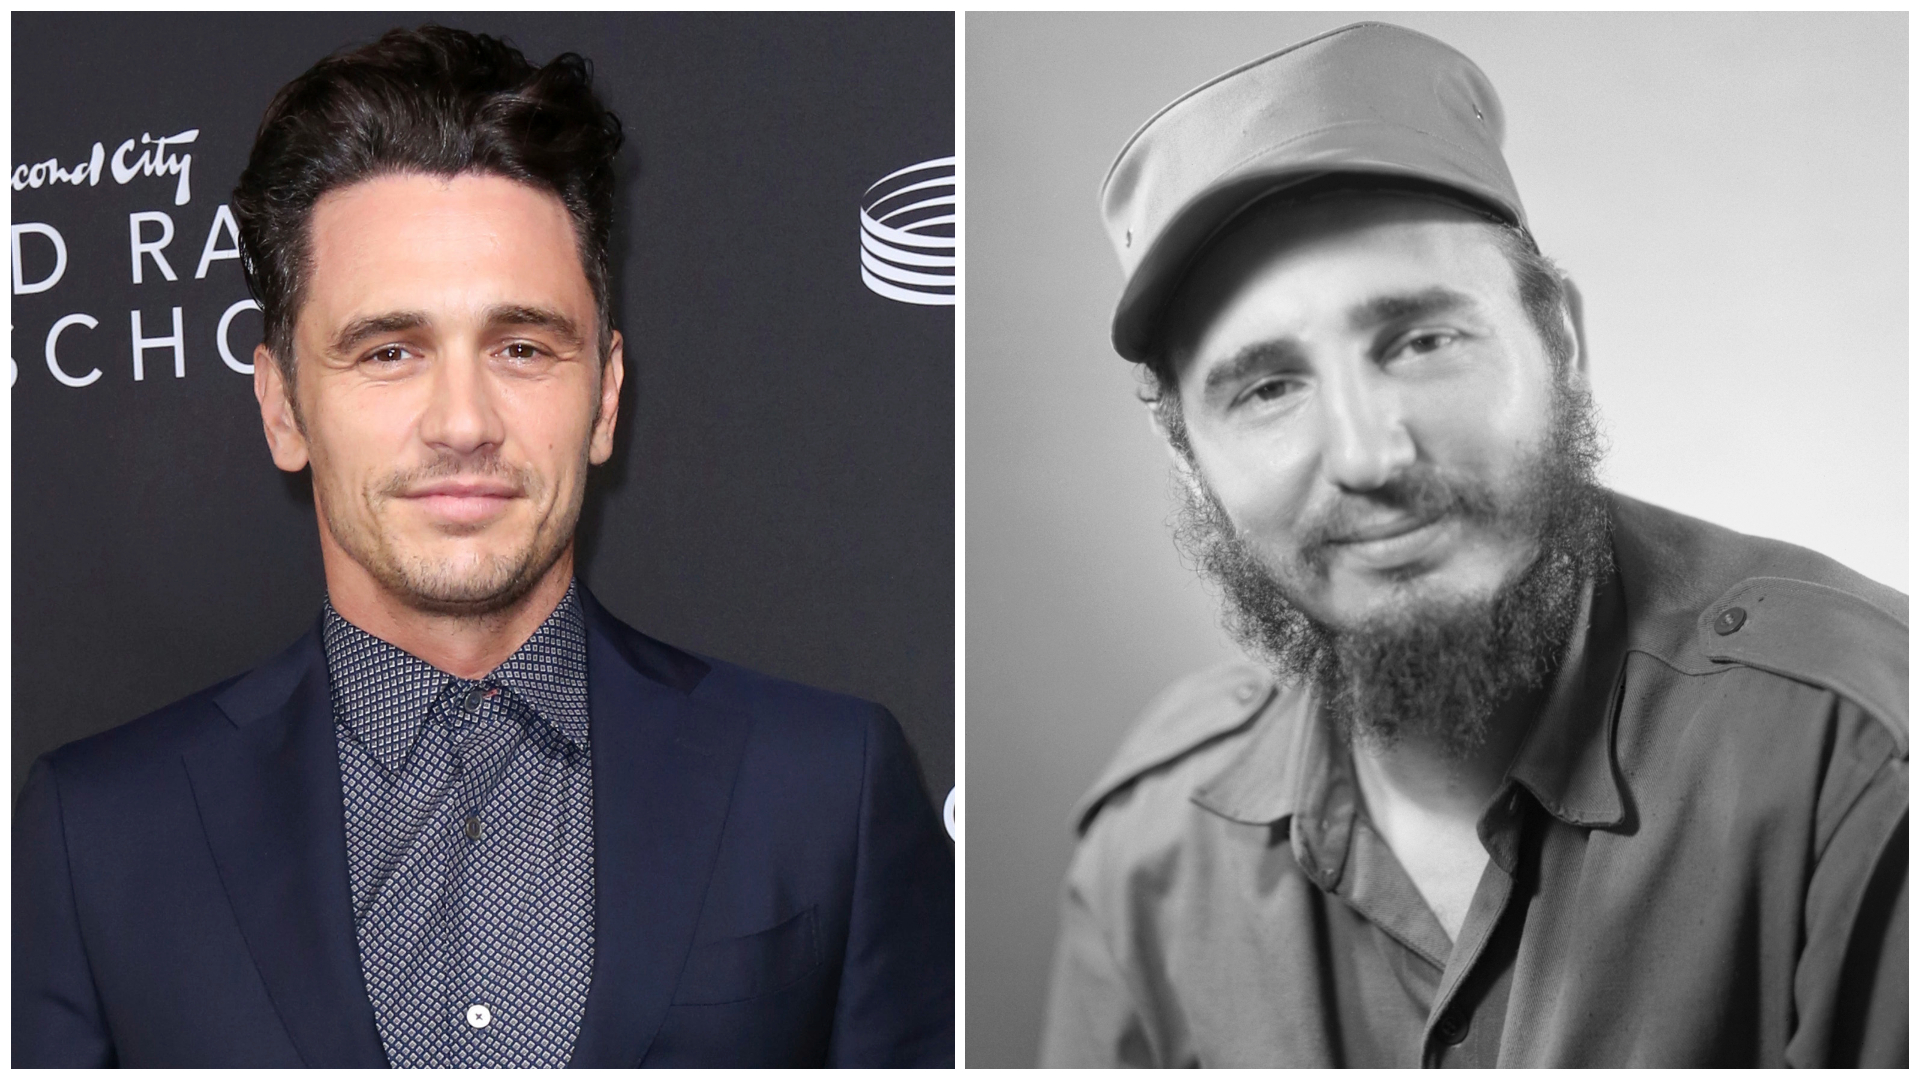 The casting of James Franco as Fidel Castro sparks anger